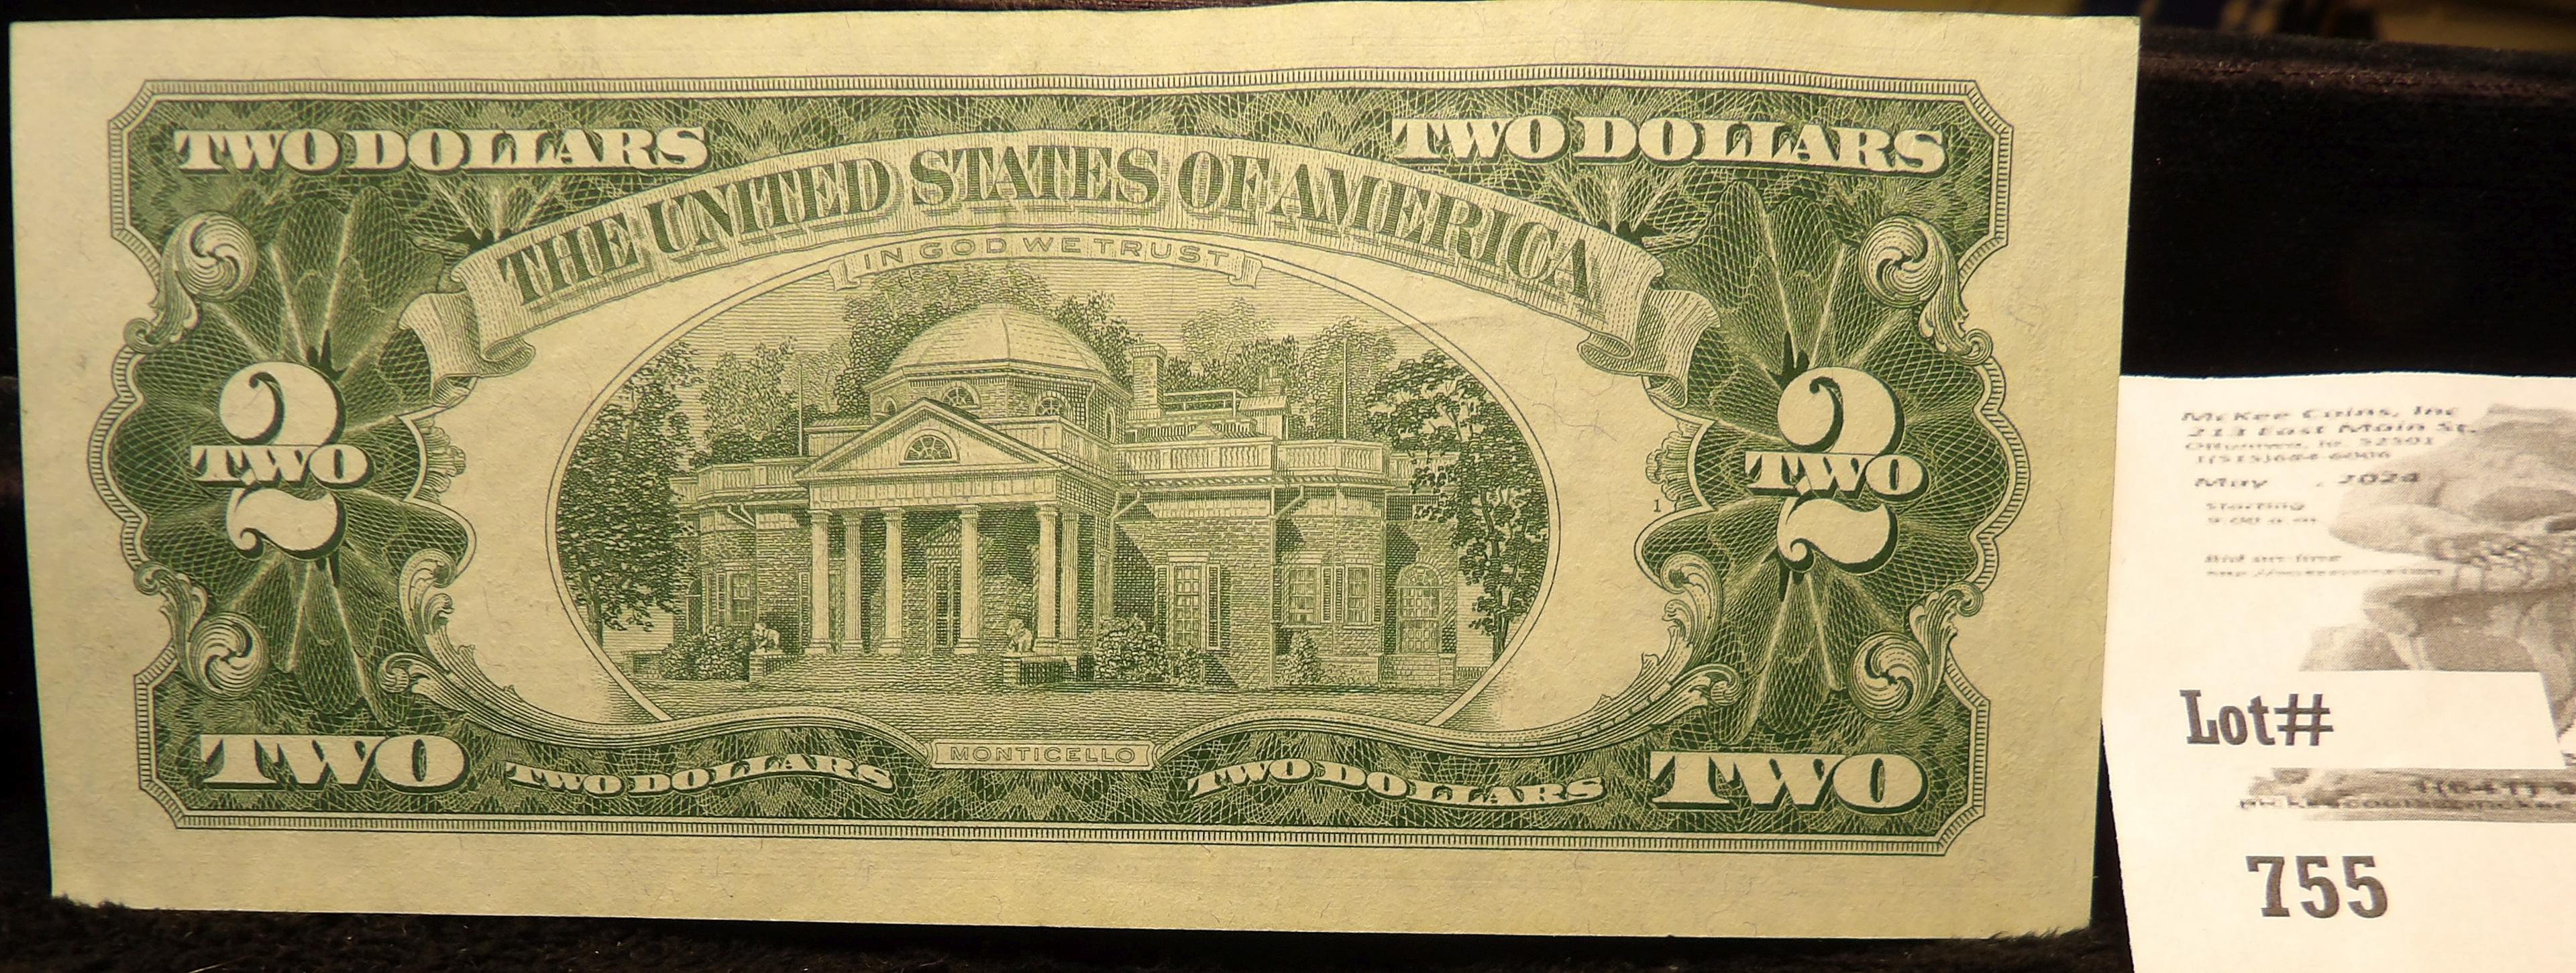 Series 1963 $2 U.S. Note, Inking on obverse, Red Seal. Scarce Star replacement note.